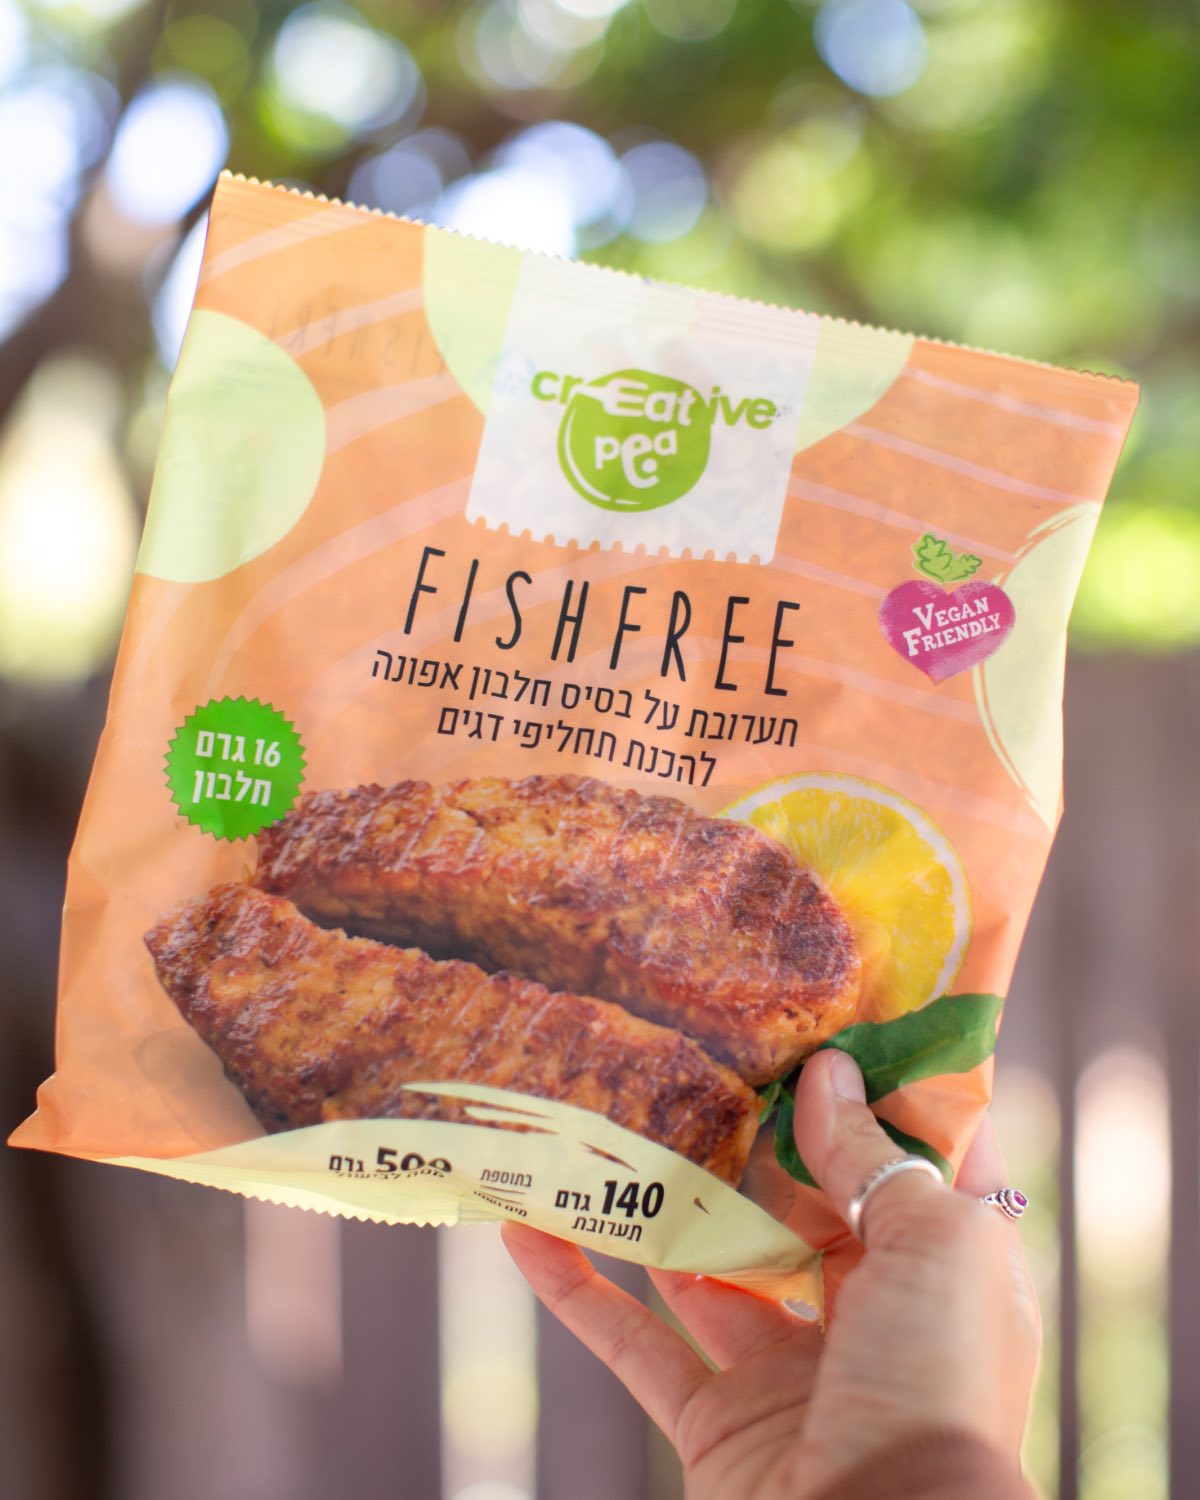 A bag of vegan fish mix from the brand Creative Pea.